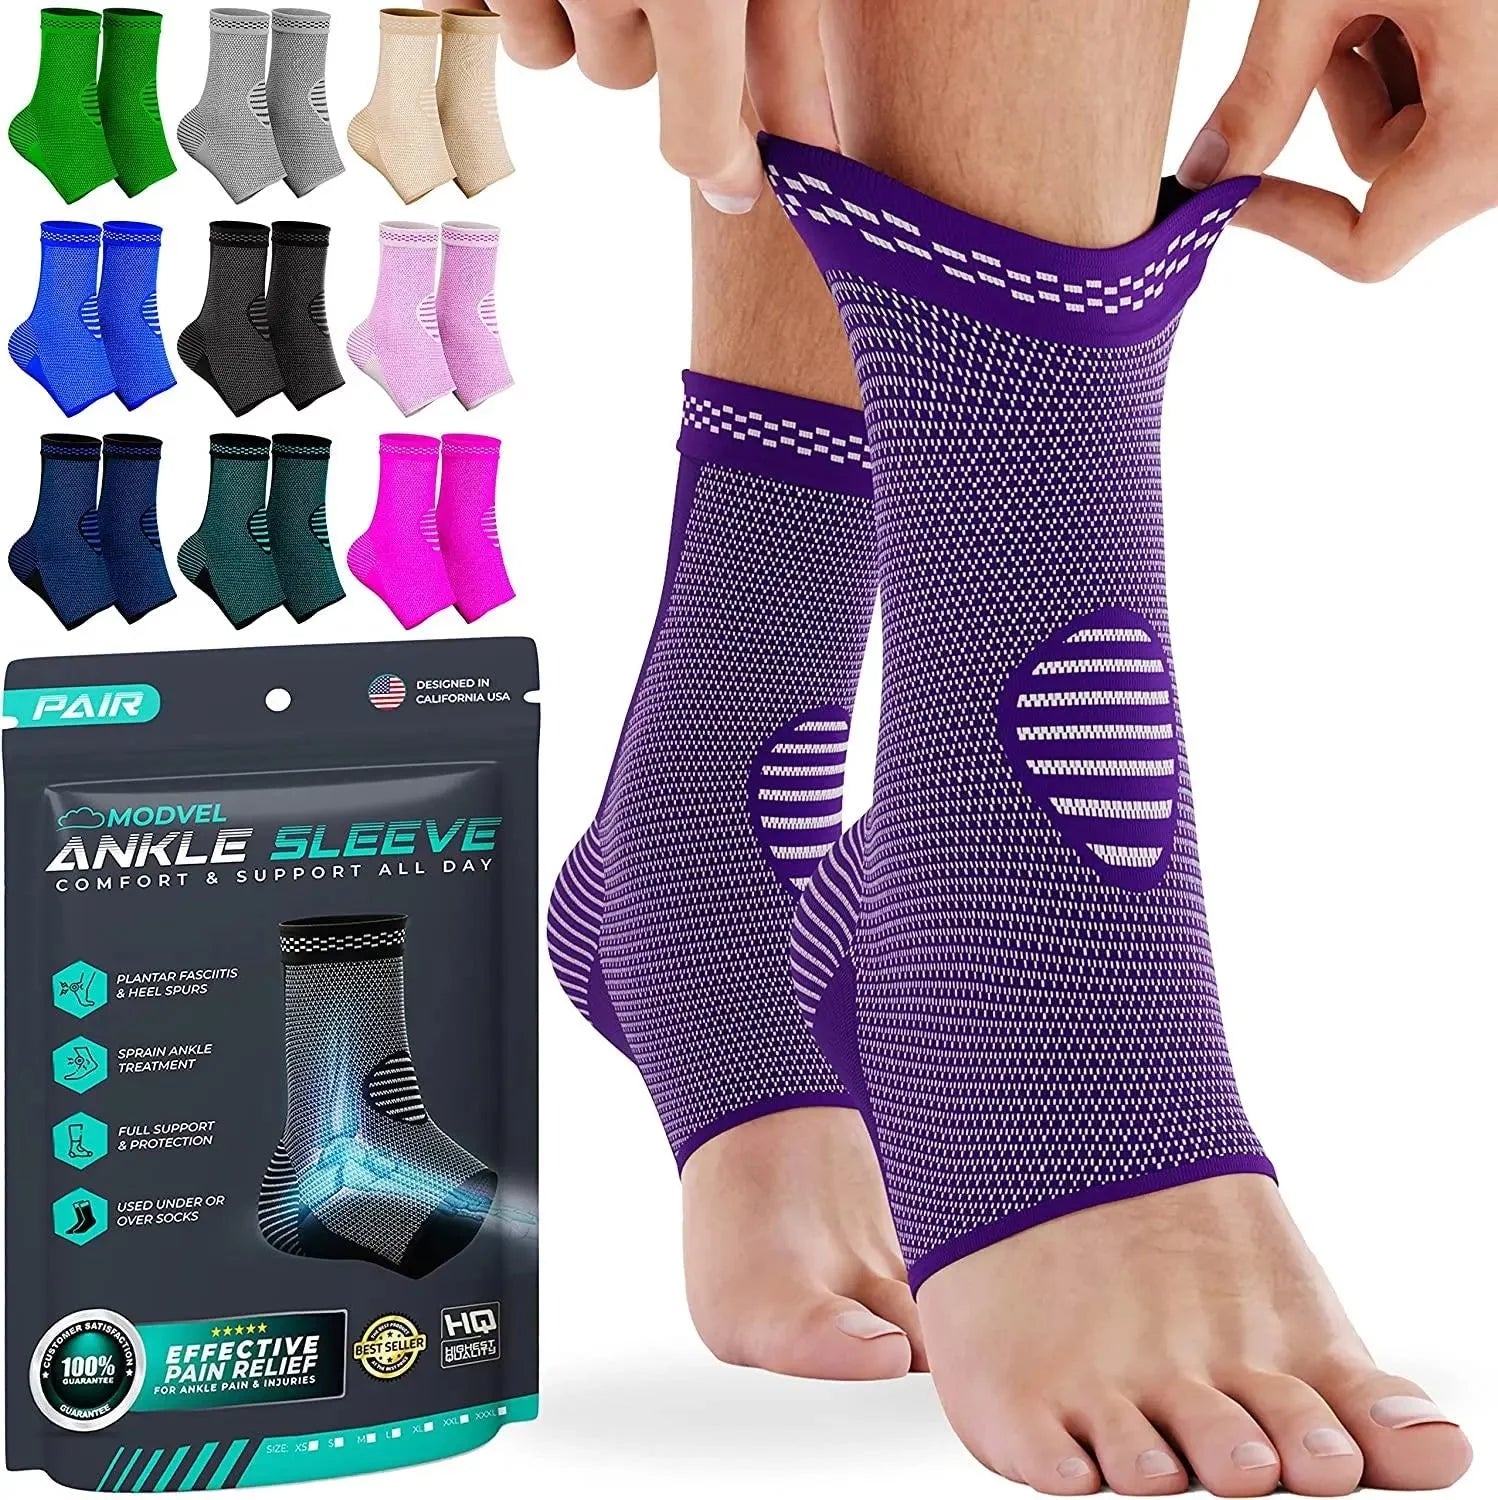 Ankle Support Compression Brace For Ankle Pain Relief, Recovery & Support